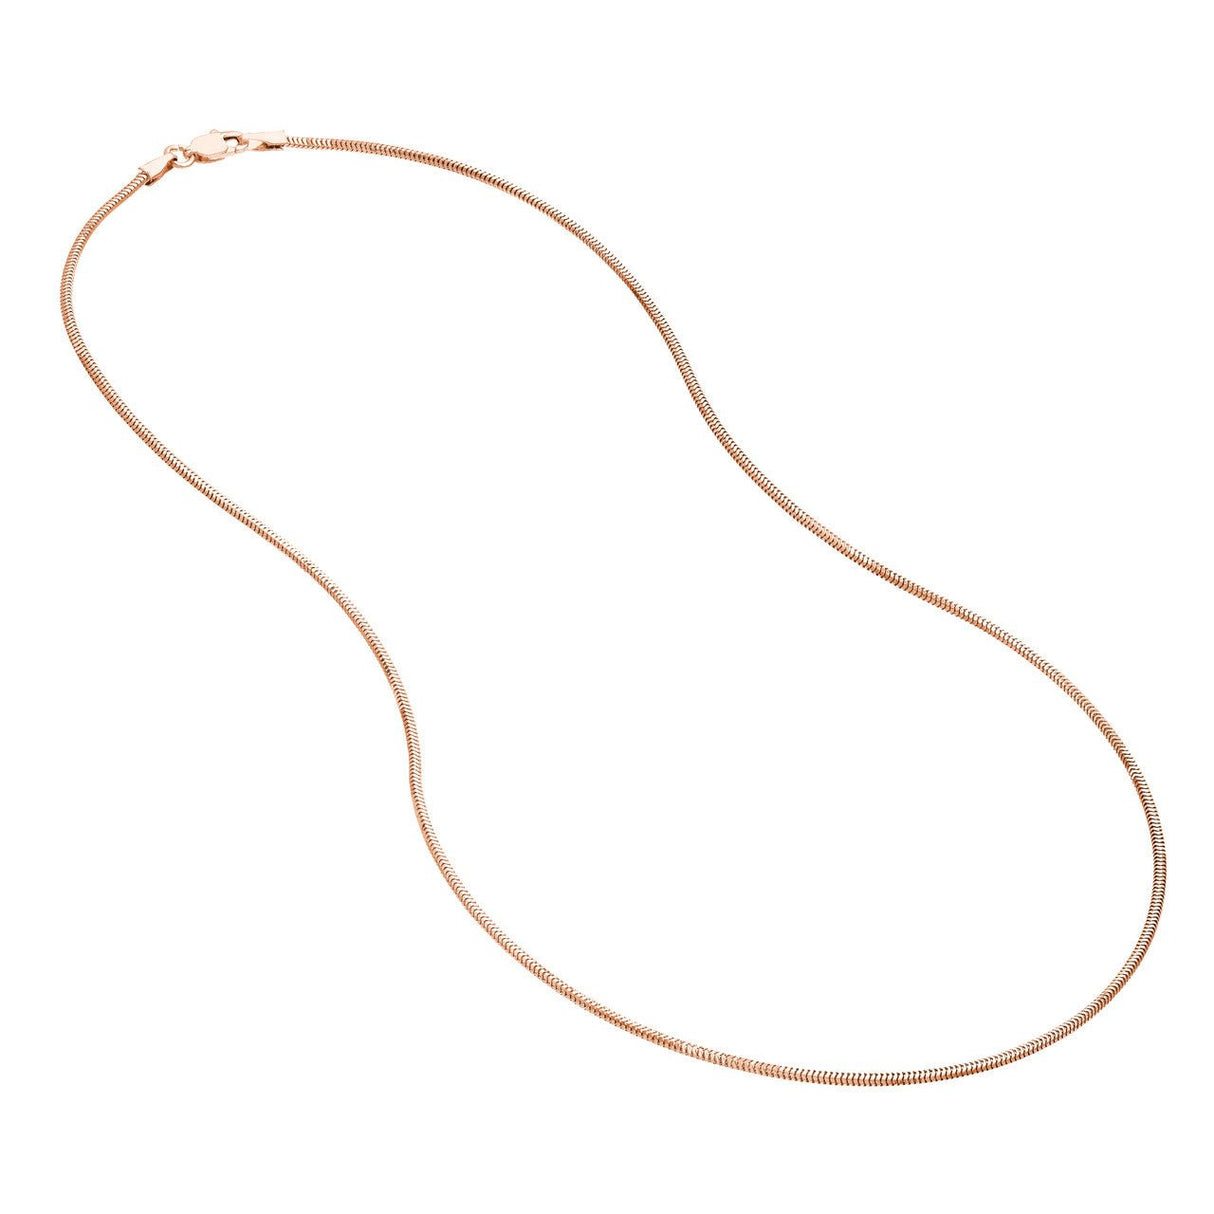 10K Gold Chain,16", 1.4mm Snake Chain with Lobster Lock, Gold Chain Necklace, Gold Layered Chains, - Diamond Origin